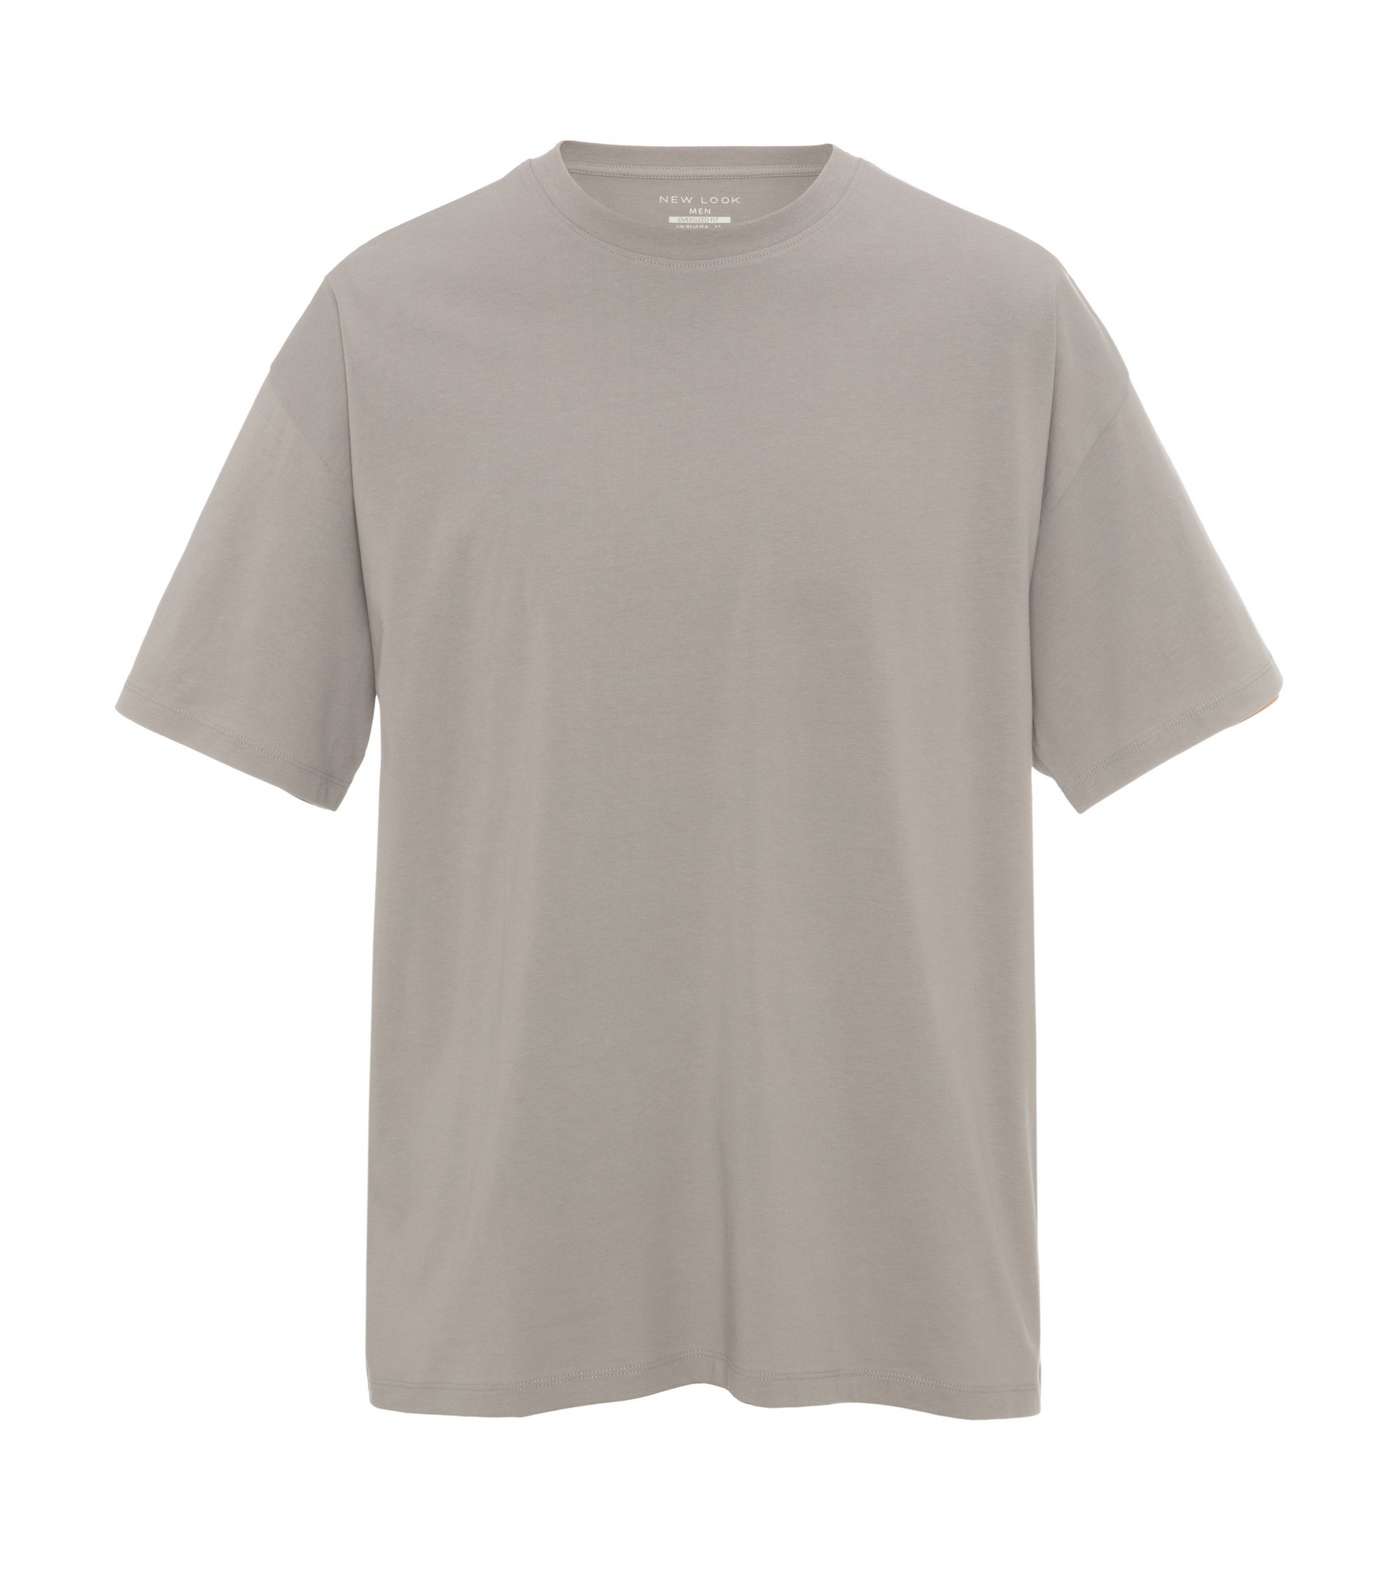 Grey Plain Relaxed Fit T-Shirt